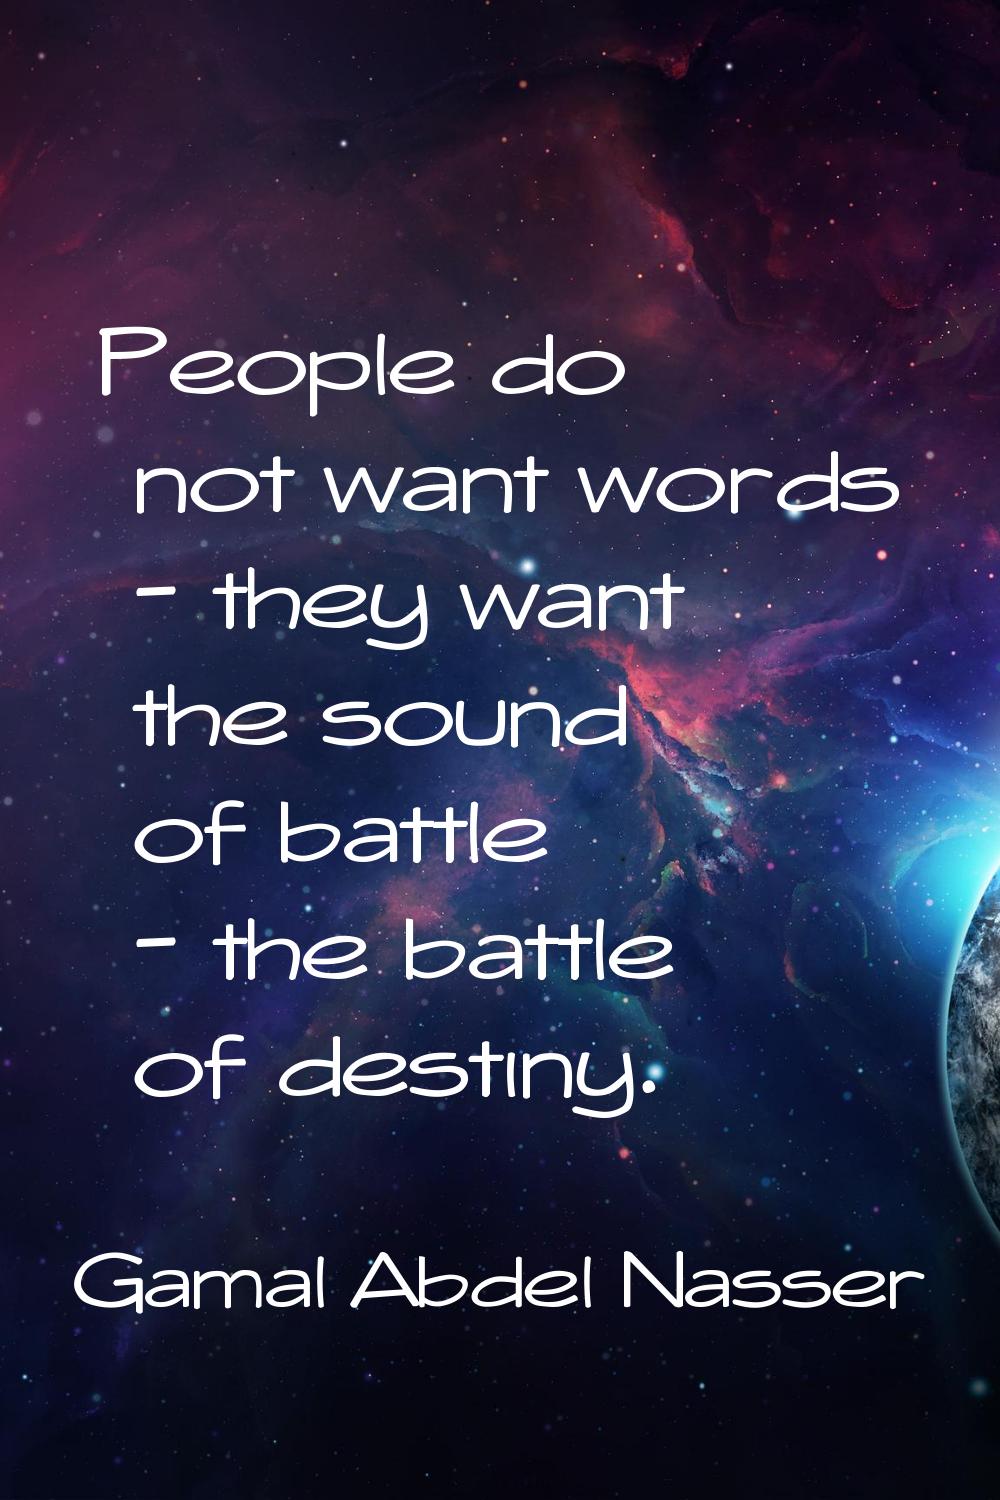 People do not want words - they want the sound of battle - the battle of destiny.